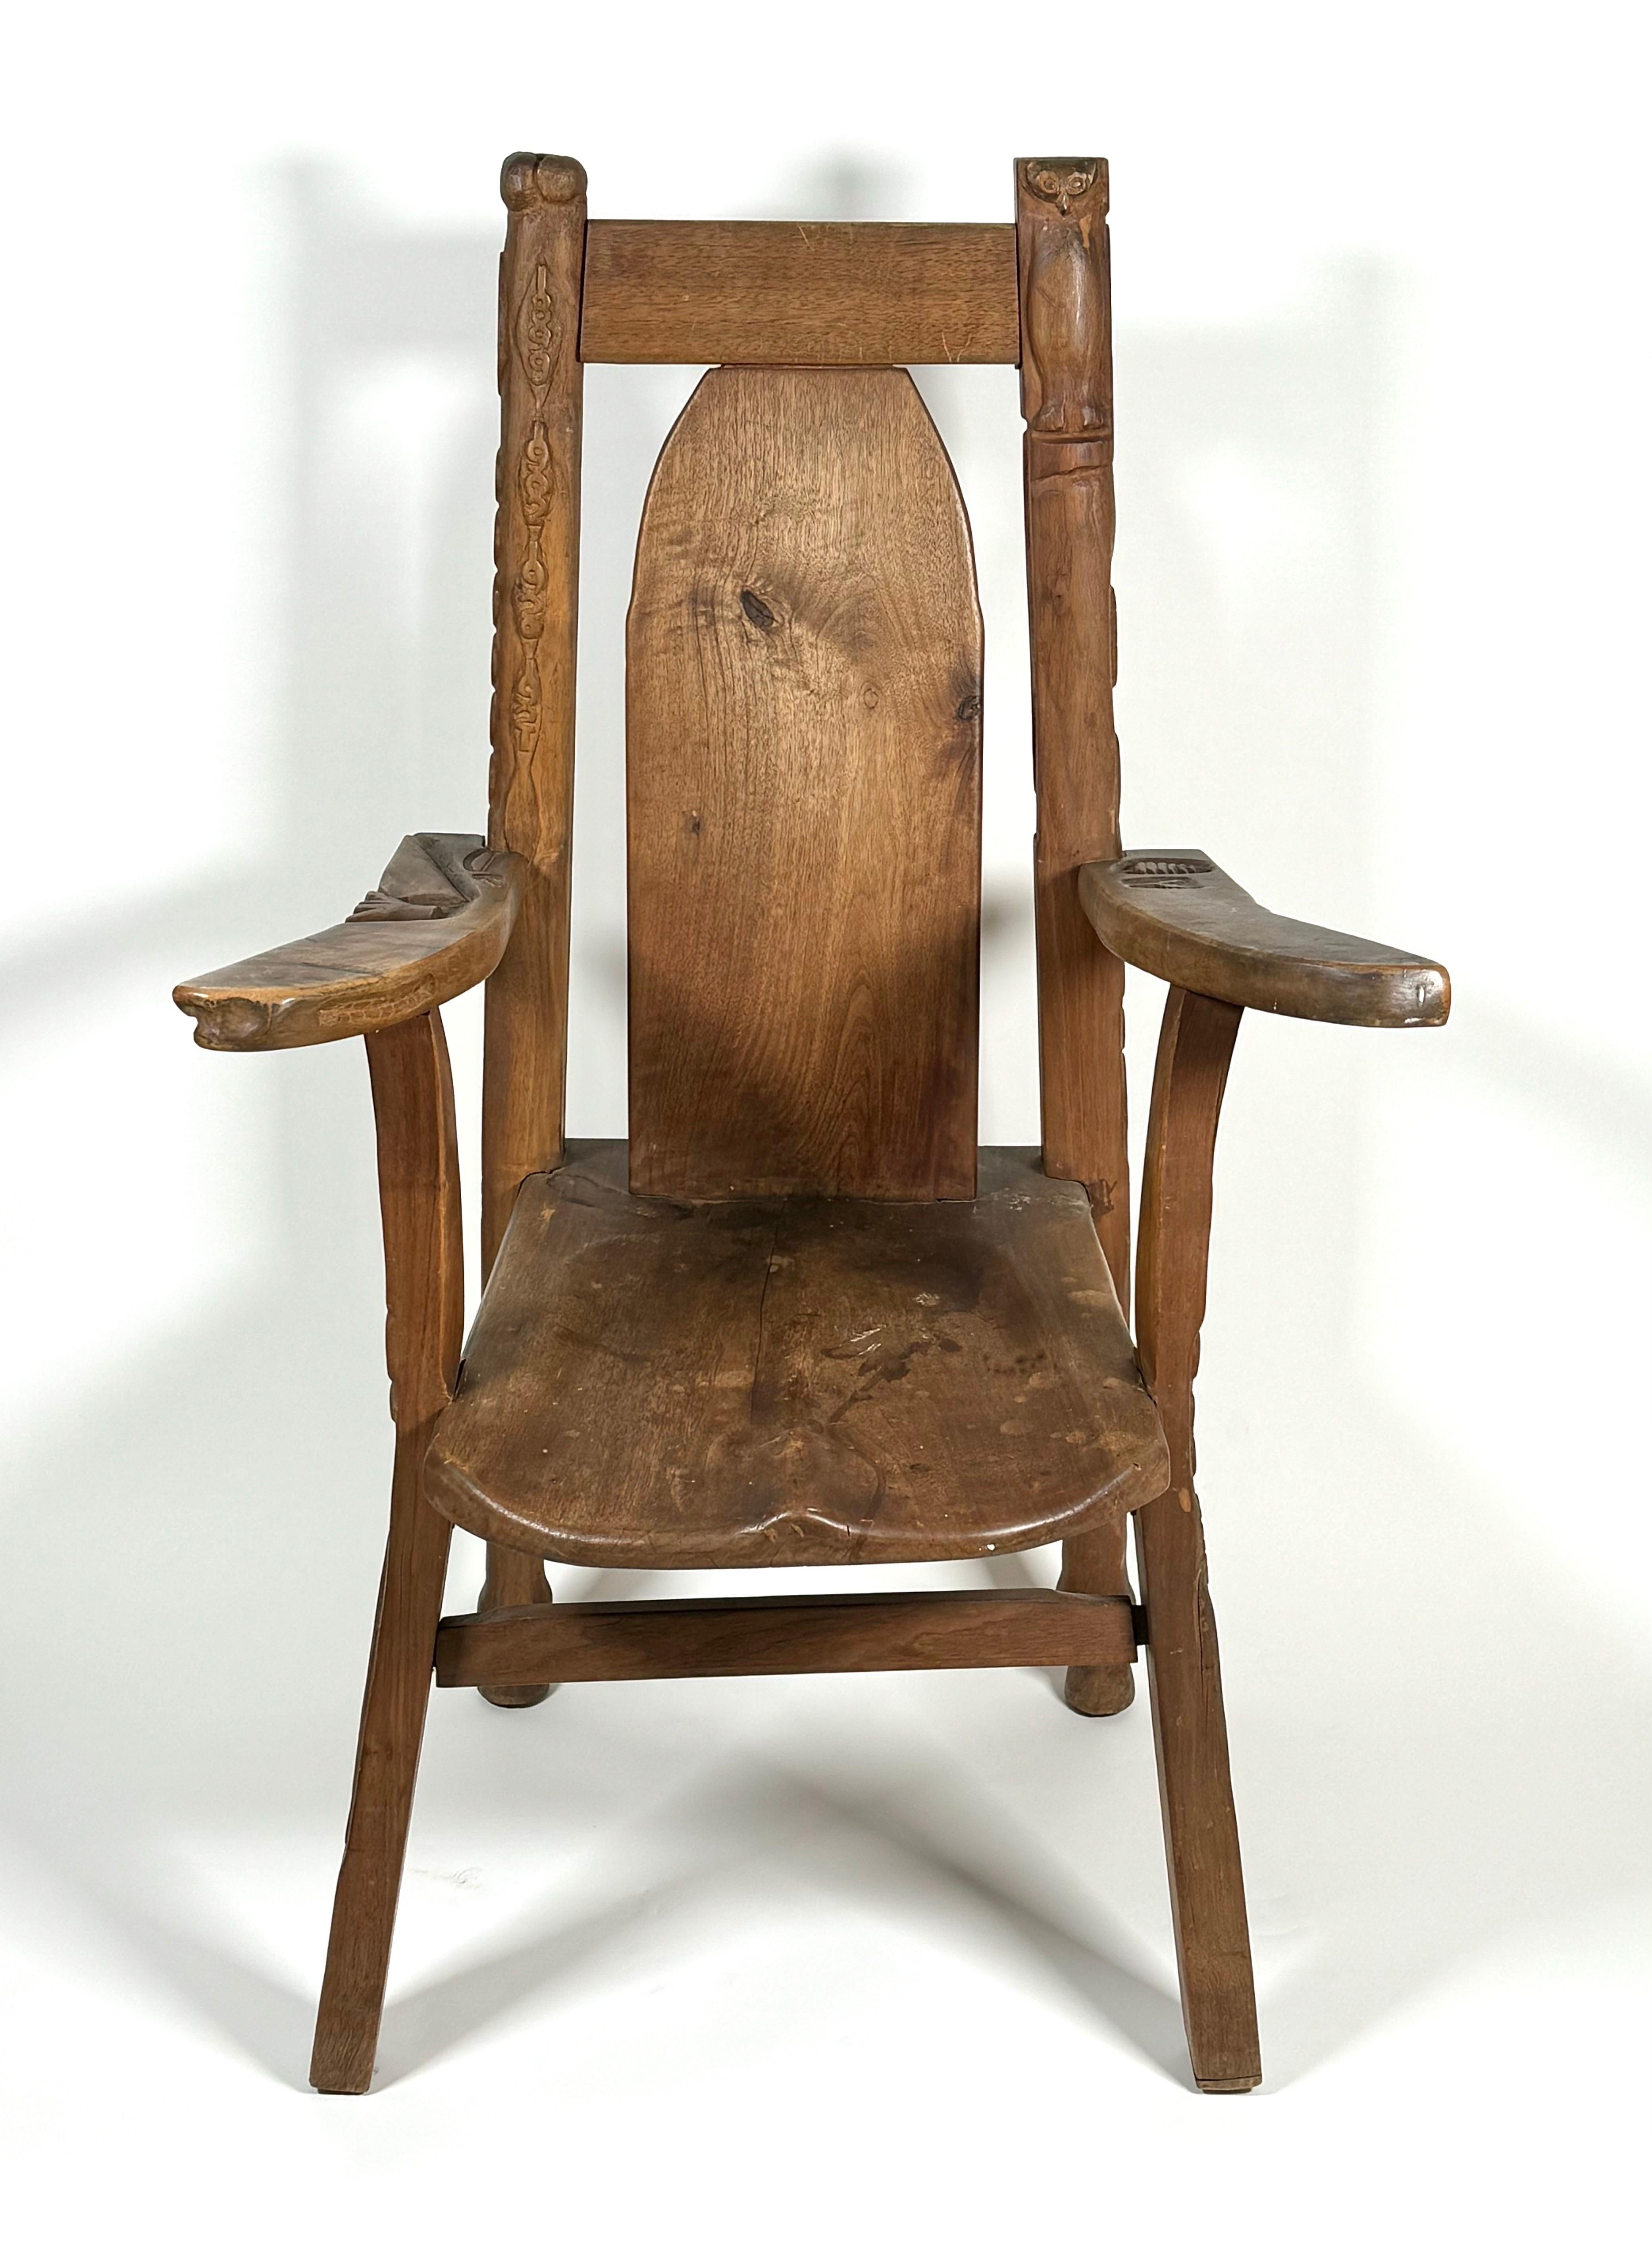 Hand carved armchair dating from 1918, the entire chair is embellished with carved imagery. Various images derived from nature and other influences with some appearing to be surreal in appearance. Possible connection with the U.S. Cavalry with